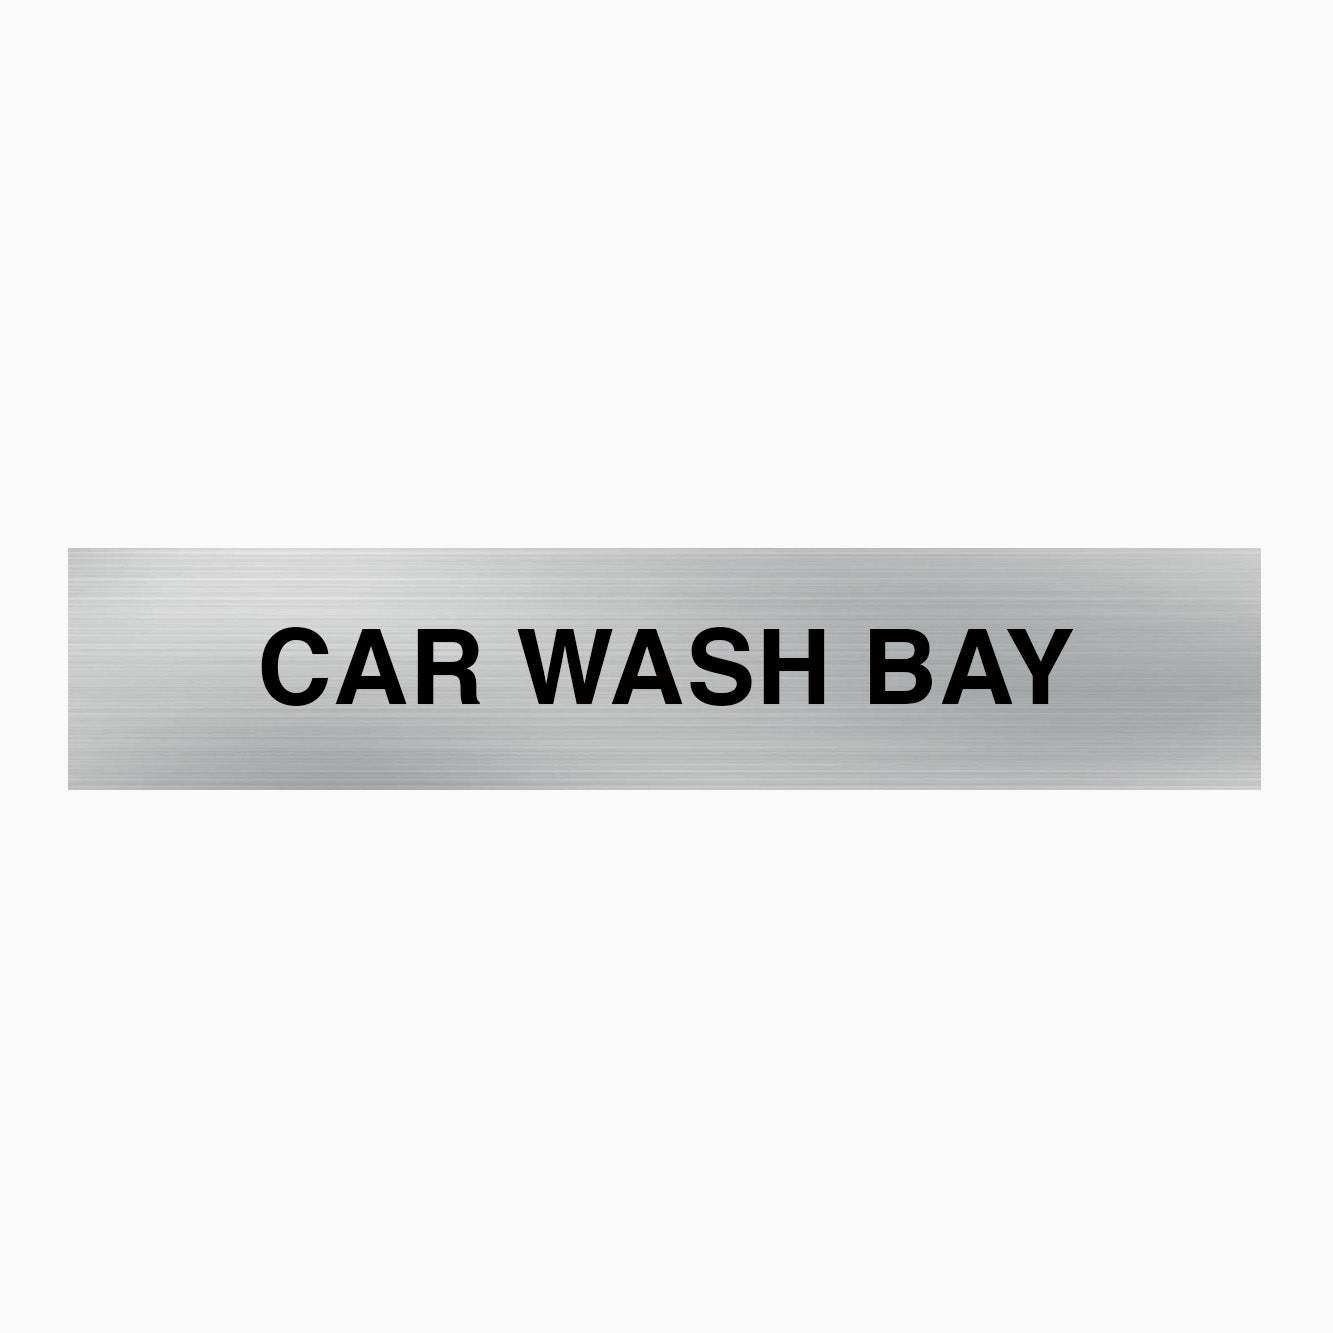 CAR WASH BAY SIGN - STATUTORY SIGNS AT GET SIGNS IN AUSTRALIA